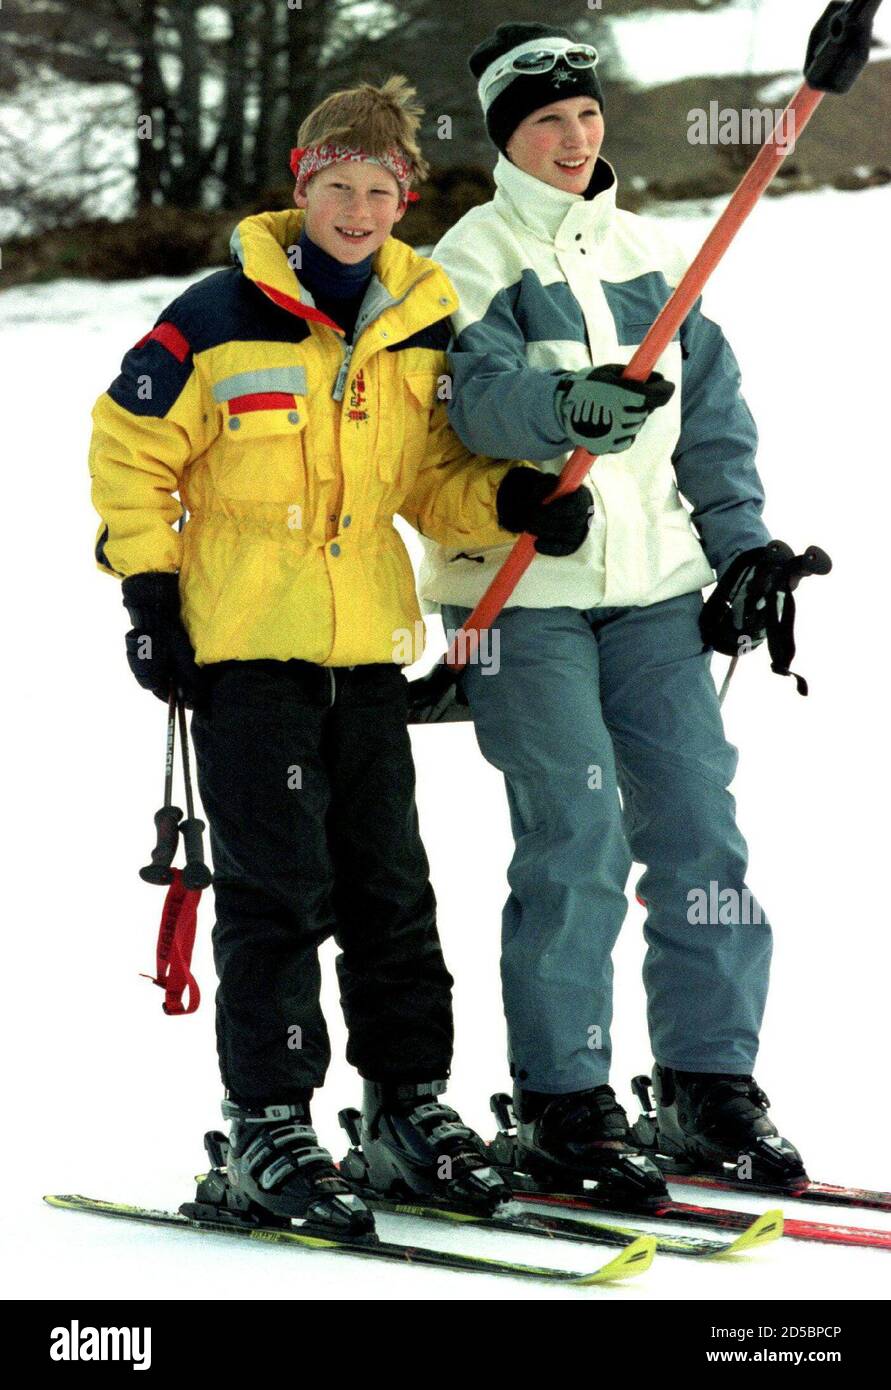 Britain's Prince Harry and his cousin Zara Phillips (R), daughter of the  Princess Royal sit on a t-bar lift in Swiss ski resort Klosters, January 2.  [Klosters remains the Prince Charles' favourite